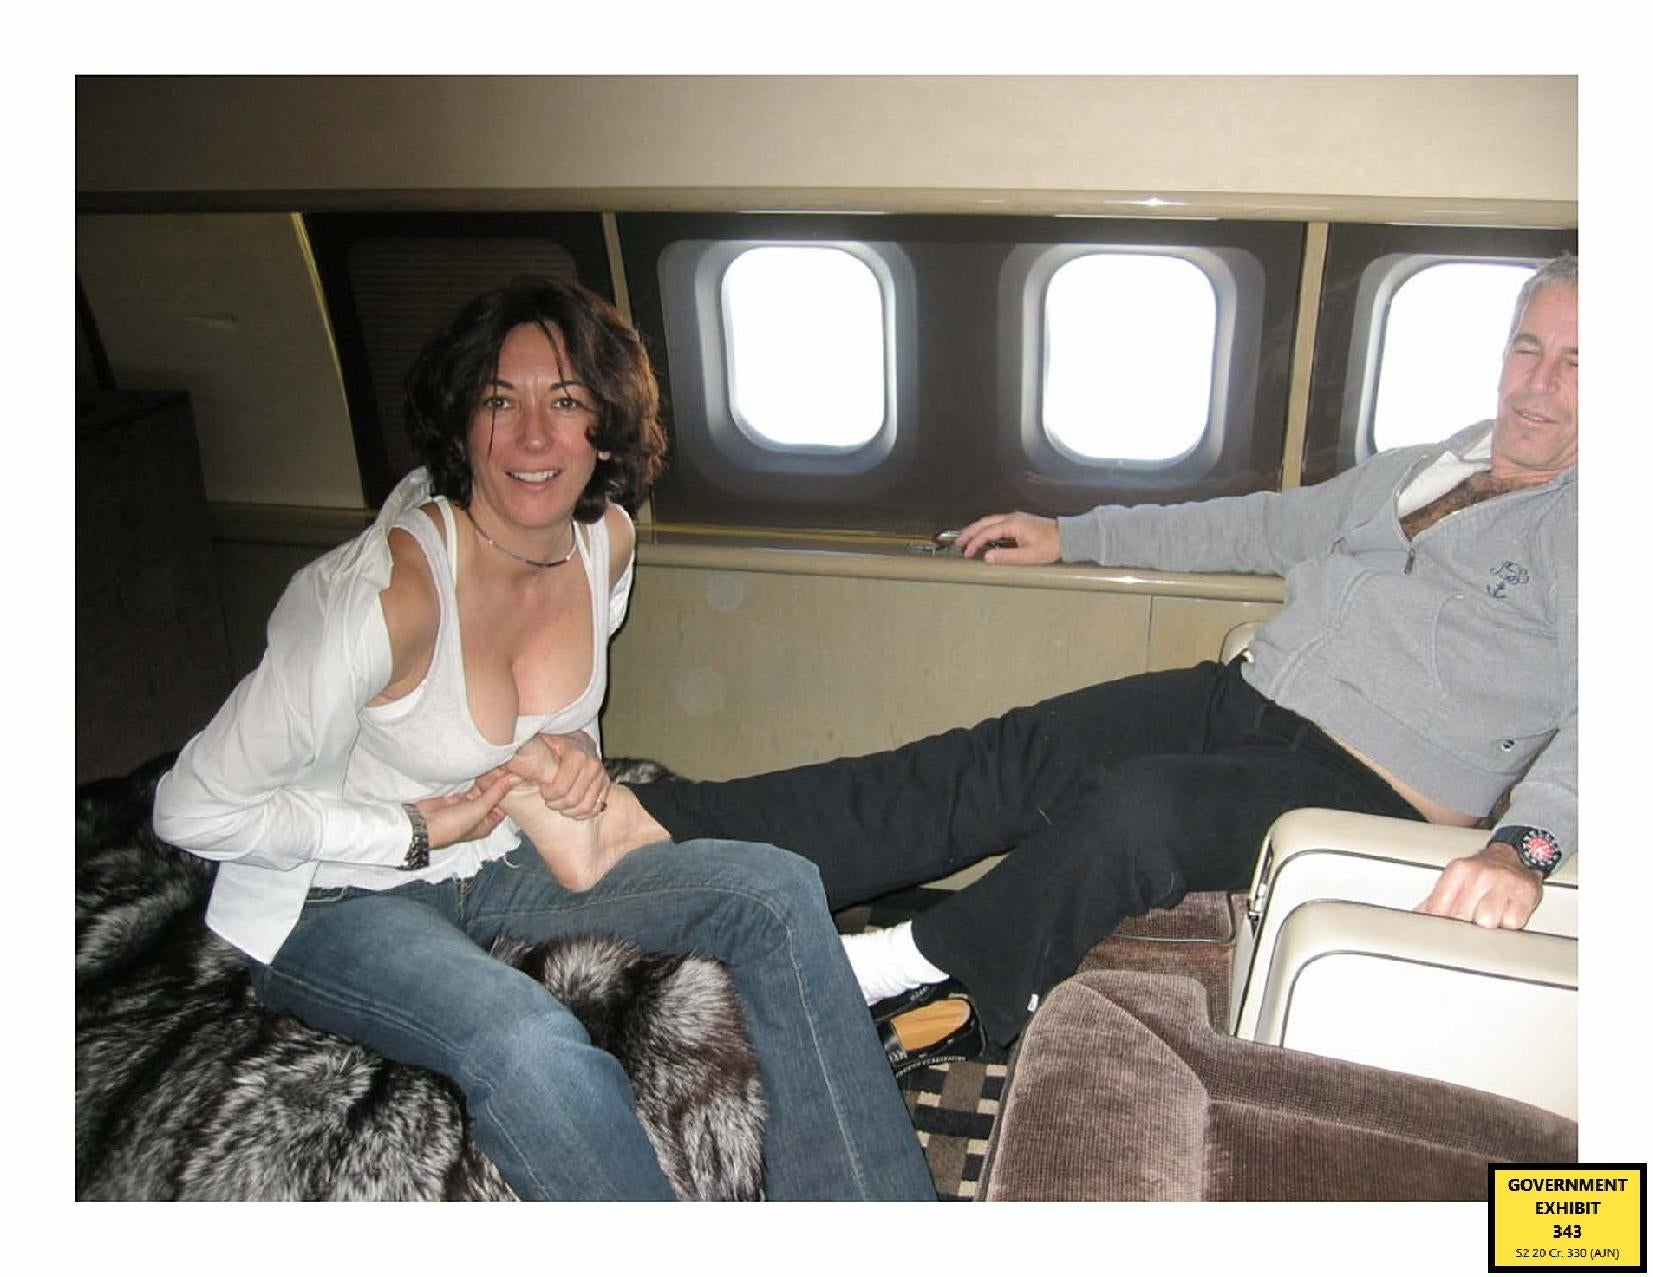 Ghislaine Maxwell gives Jeffrey Epstein a massage aboard a private jet